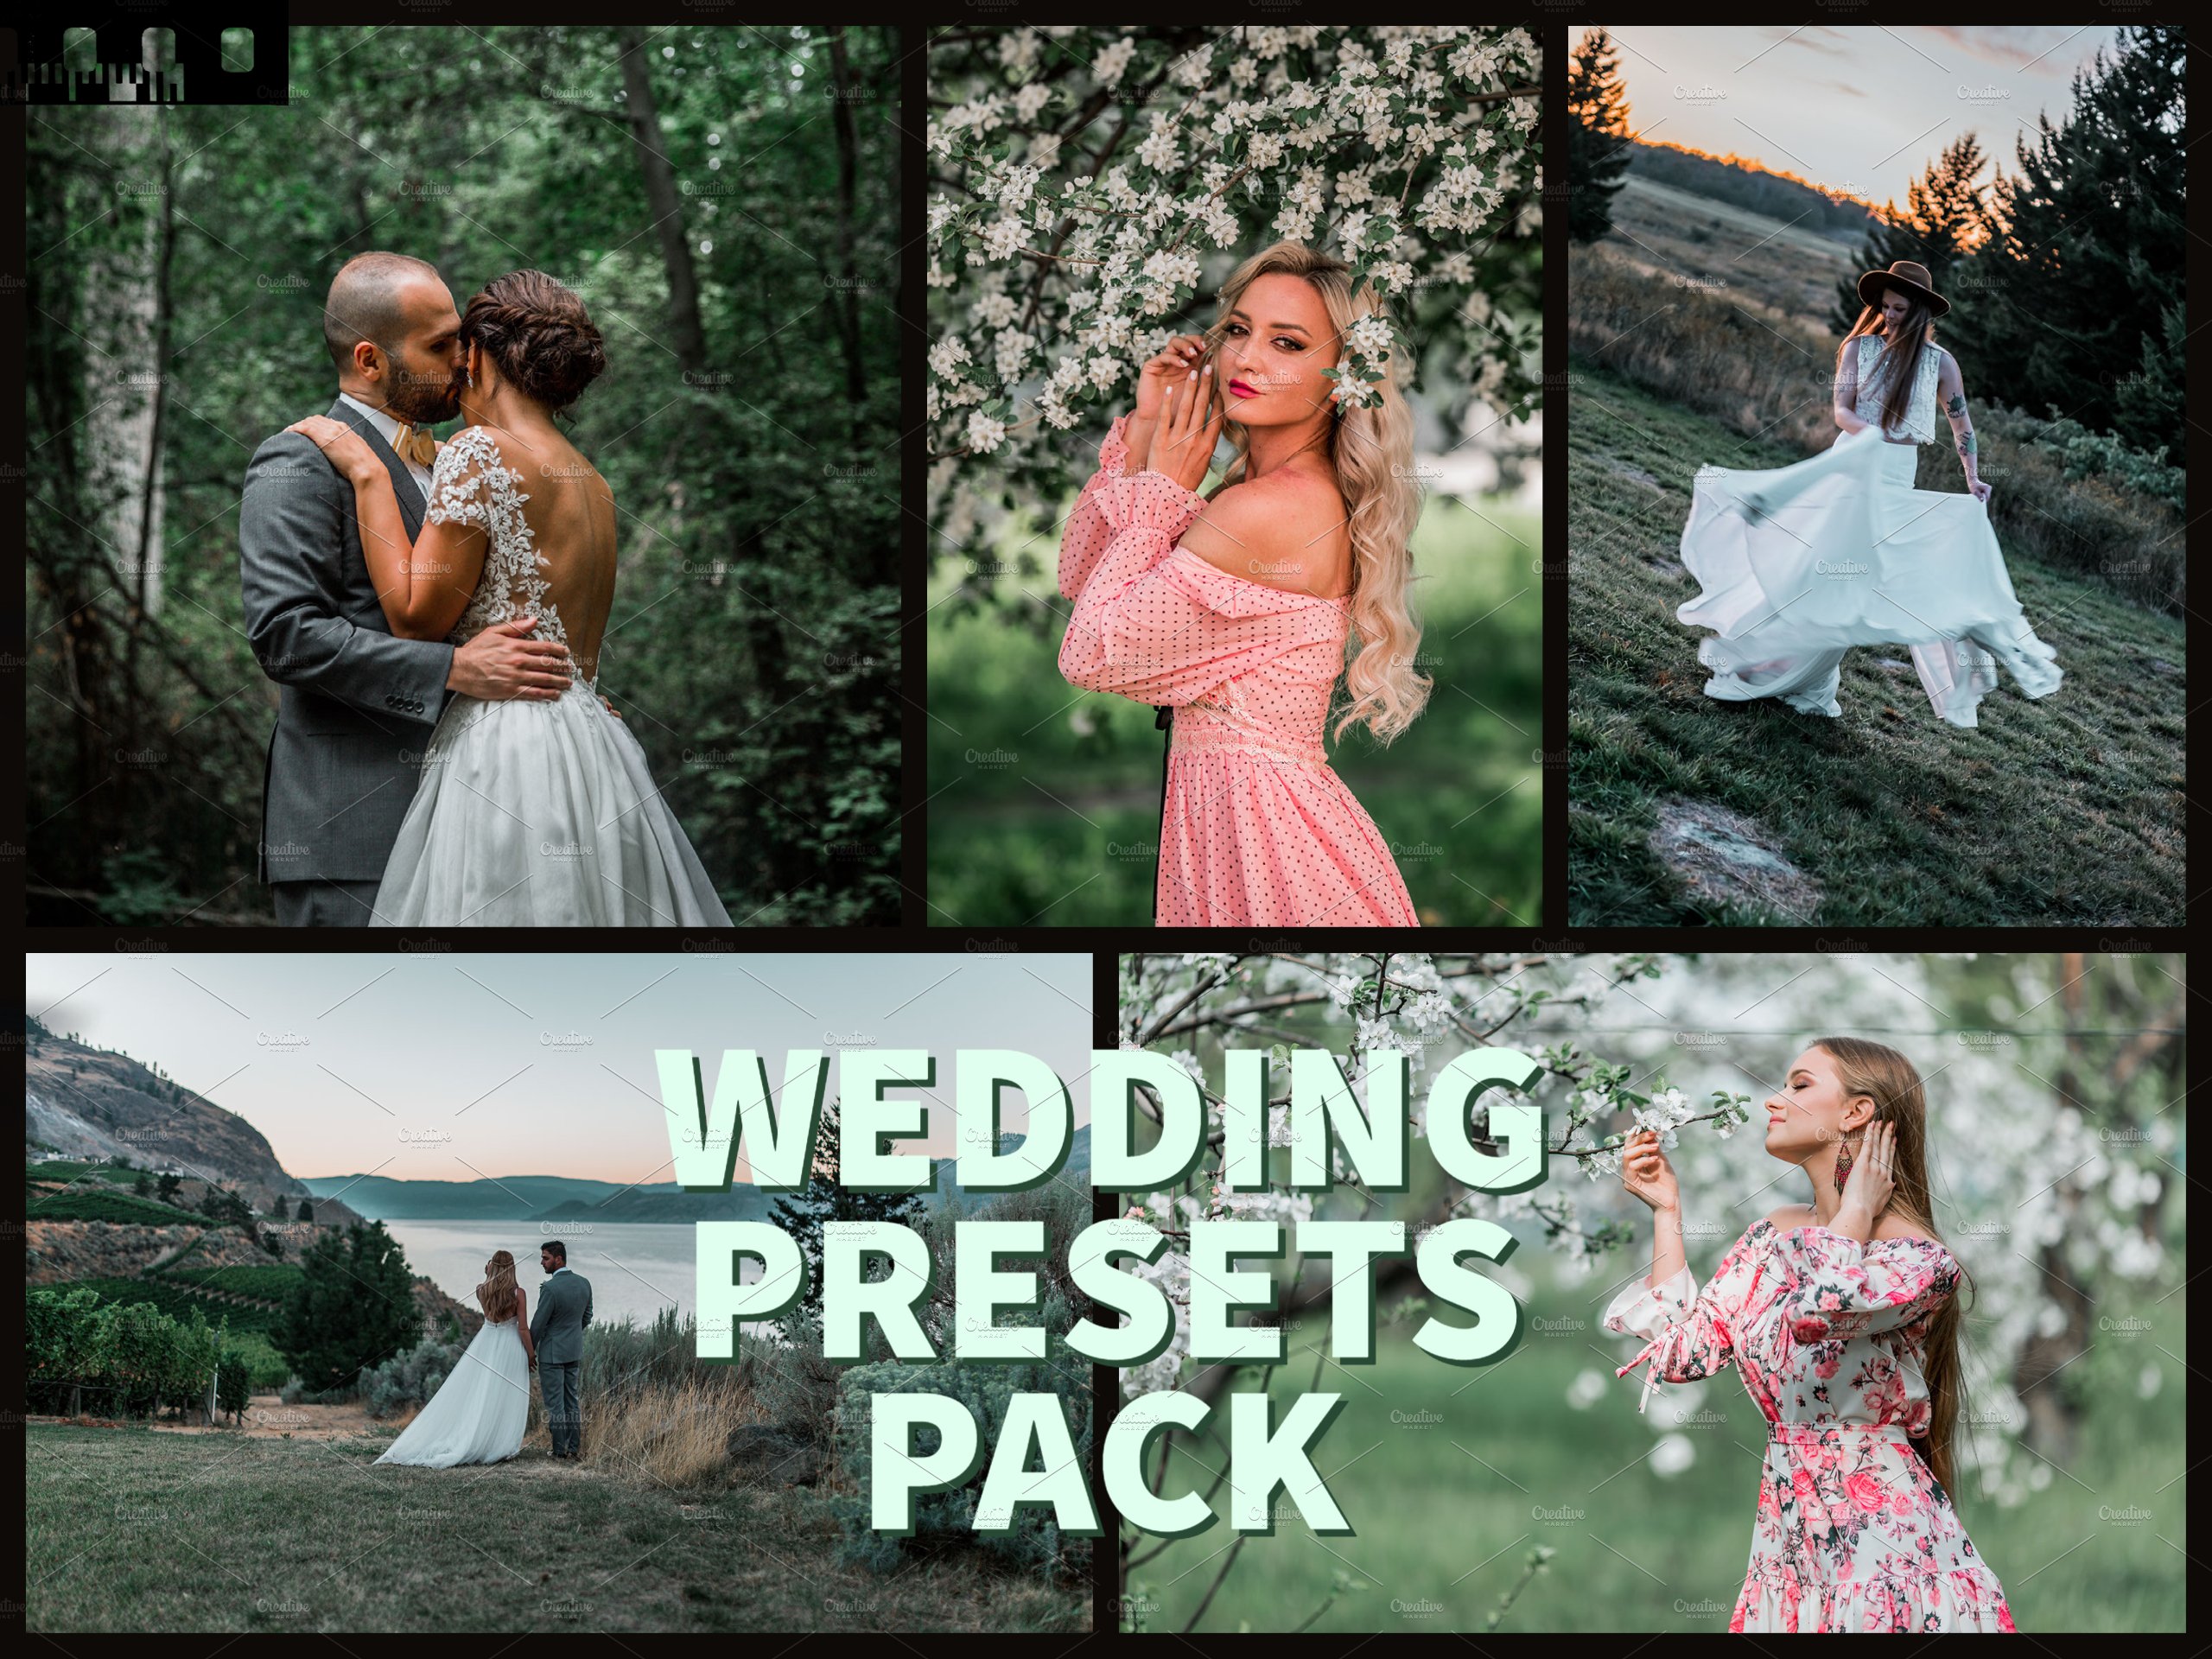 WEDDING Lightroom presets for couplecover image.